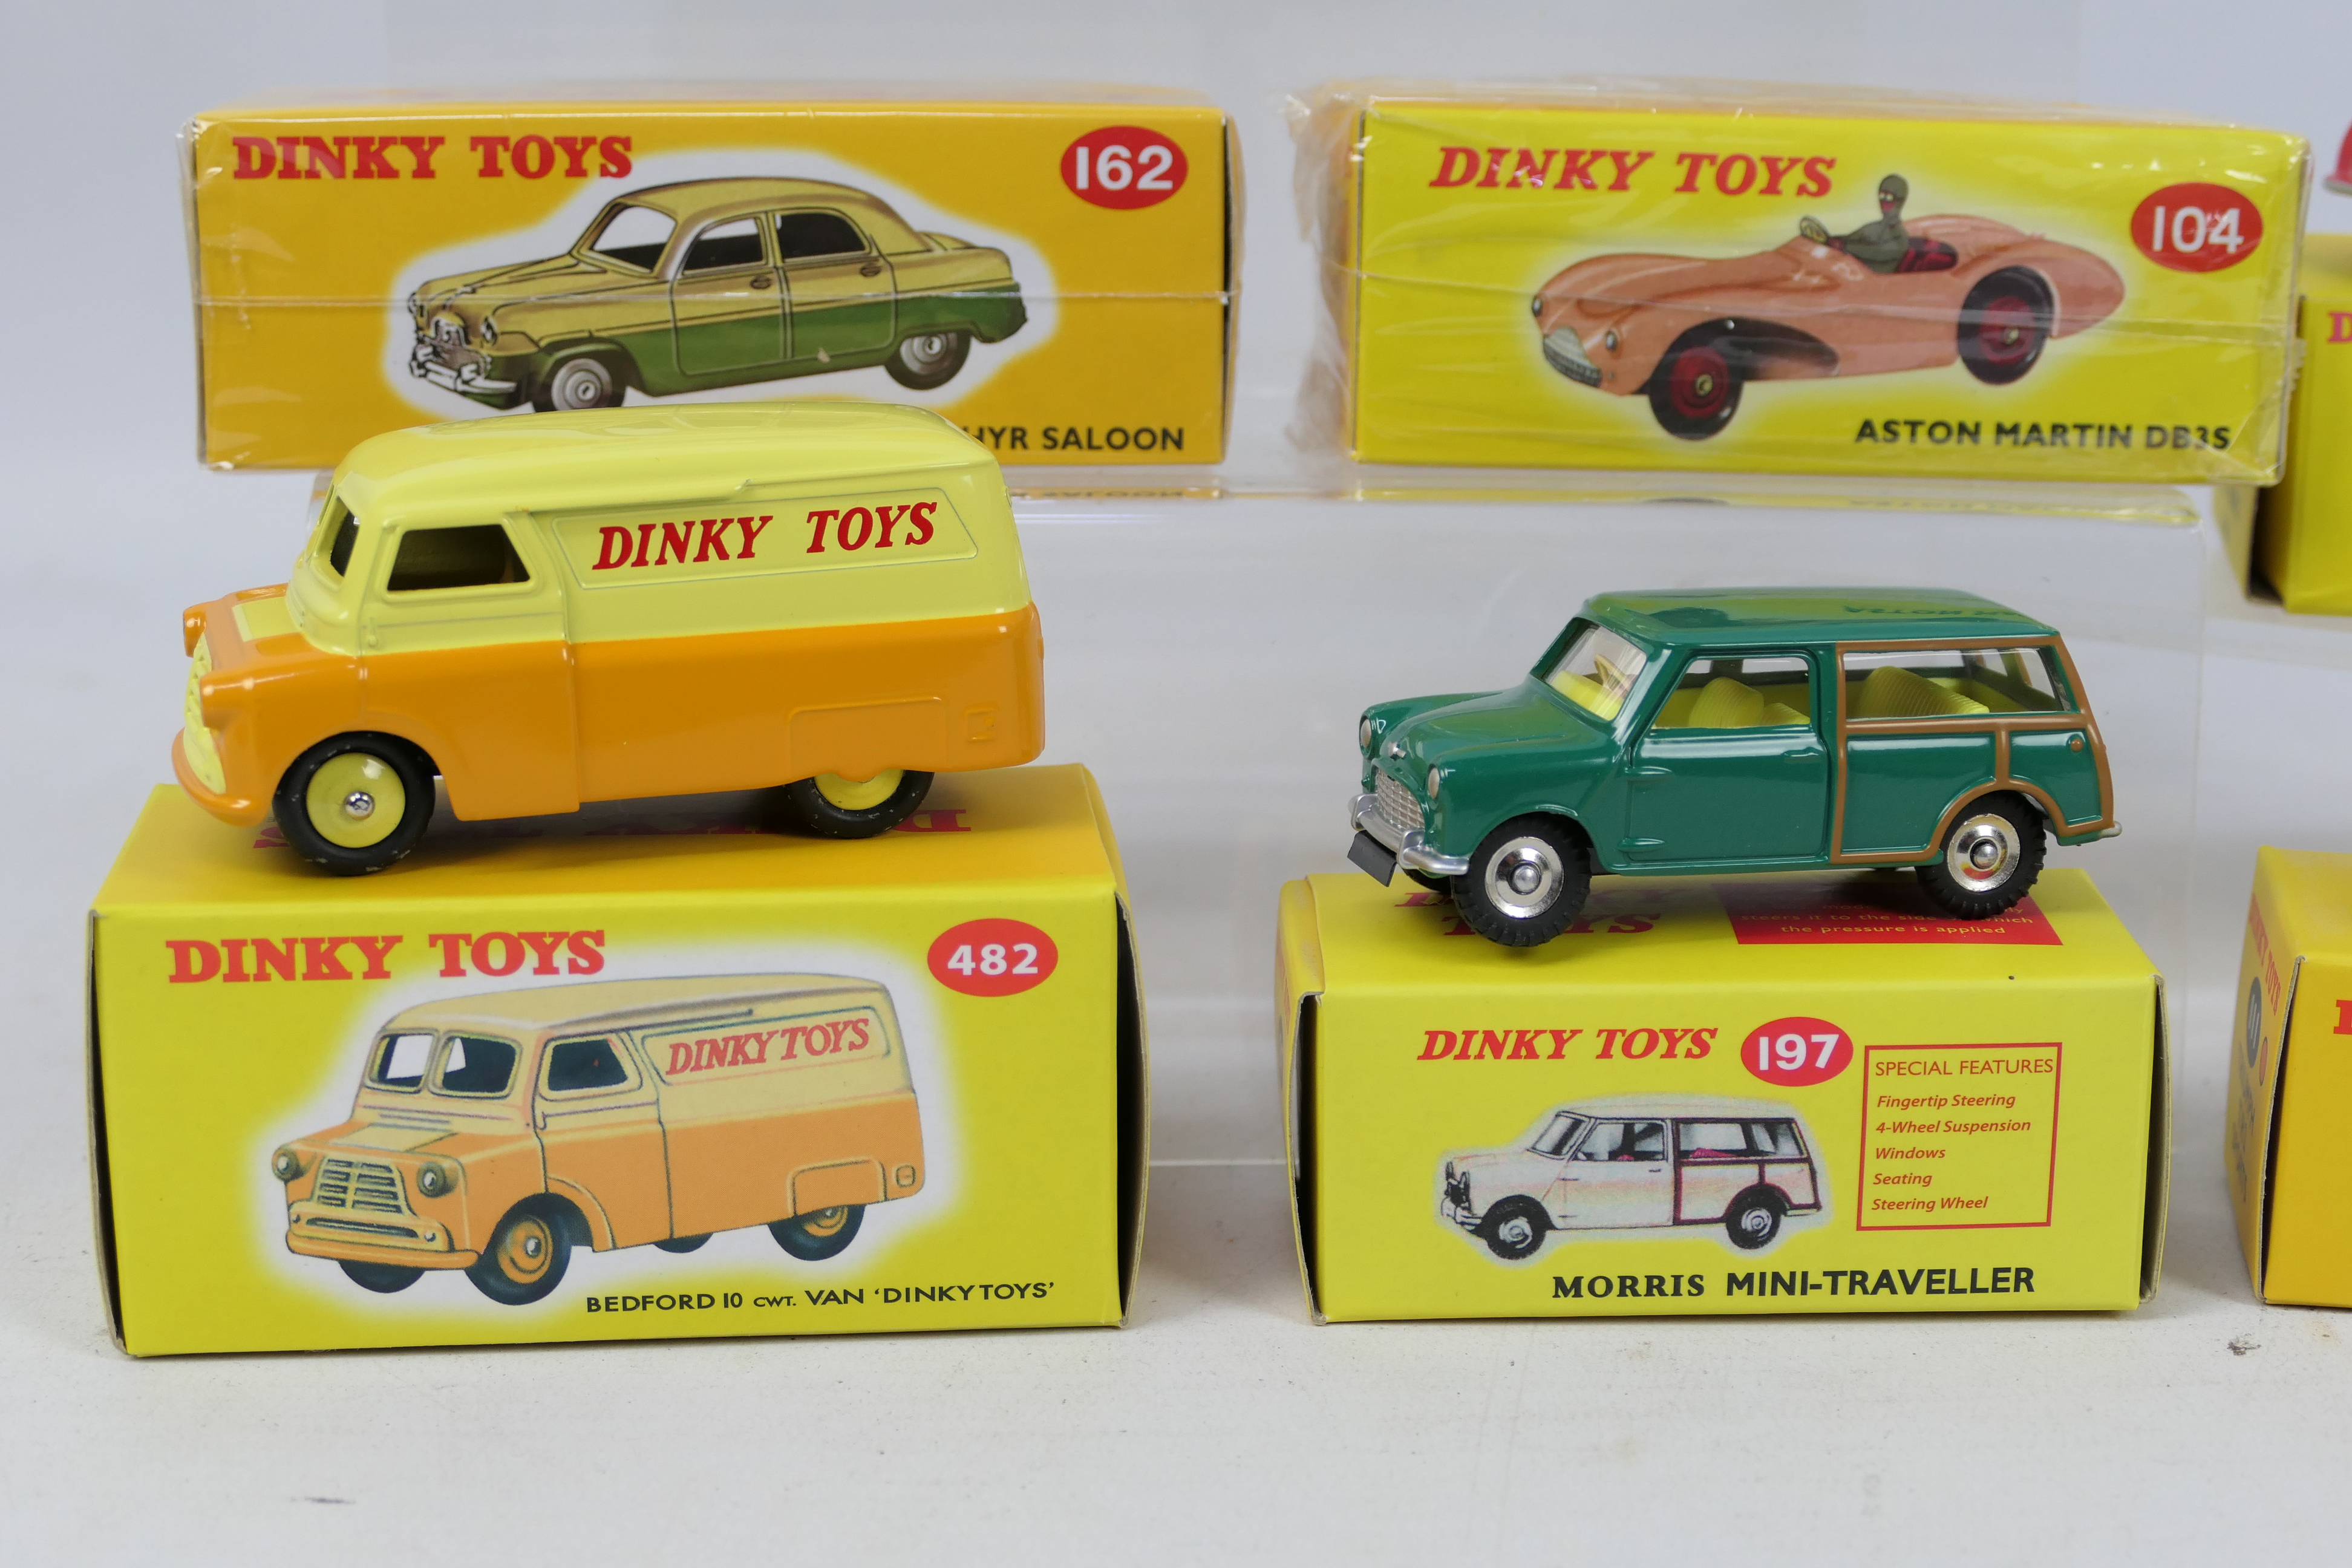 Atlas Dinky - 10 x boxed British car models including Bedford CA van in Ovaltine livery # 481, - Image 3 of 4